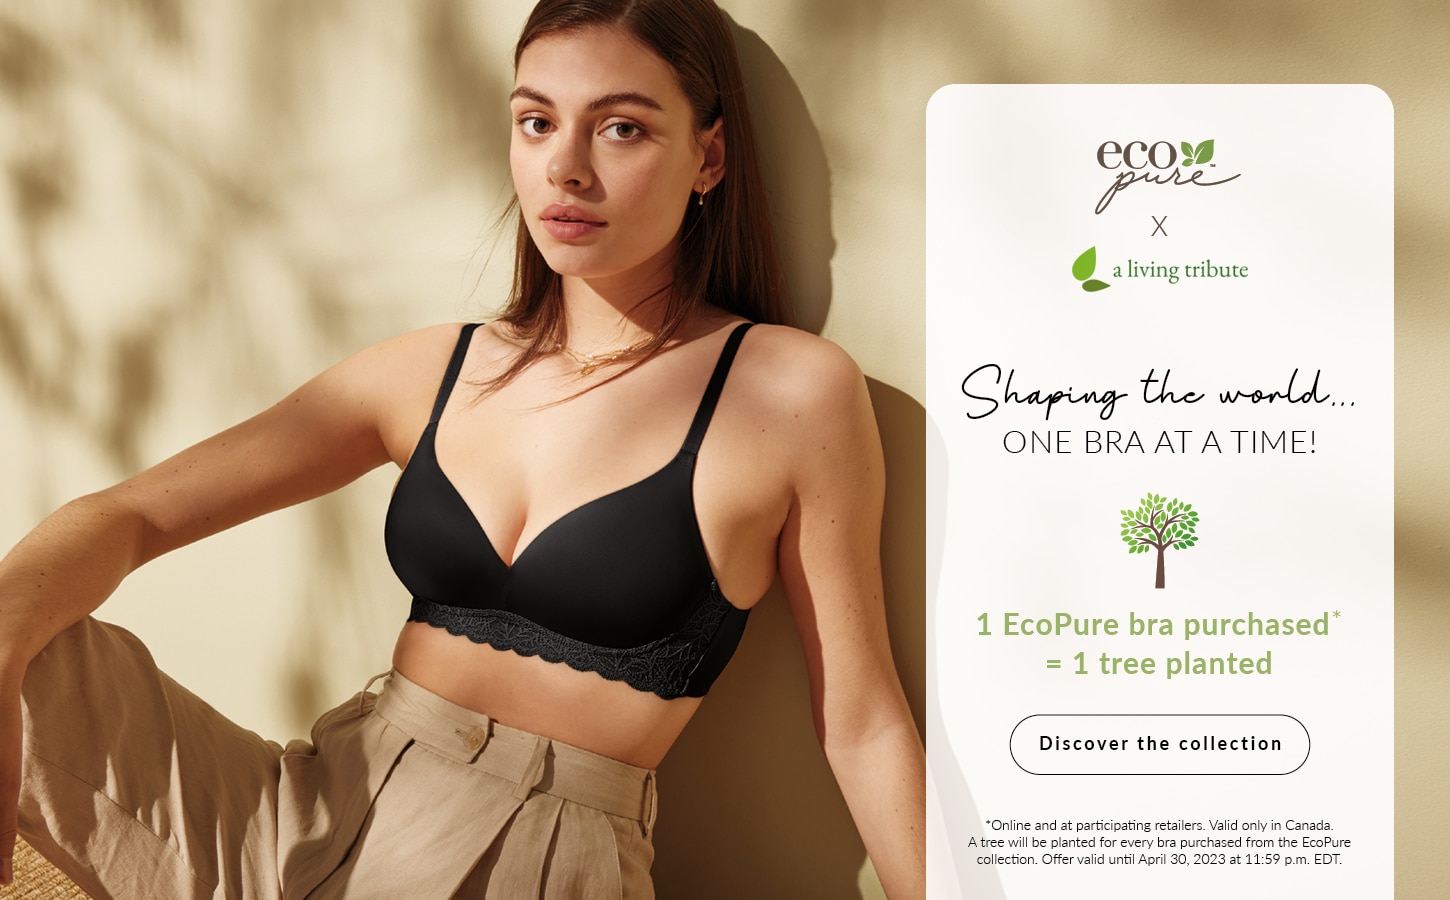 Shaping the world... One bra at a time! 1 EcoPure Bra Purchased* = 1 Tree Planted